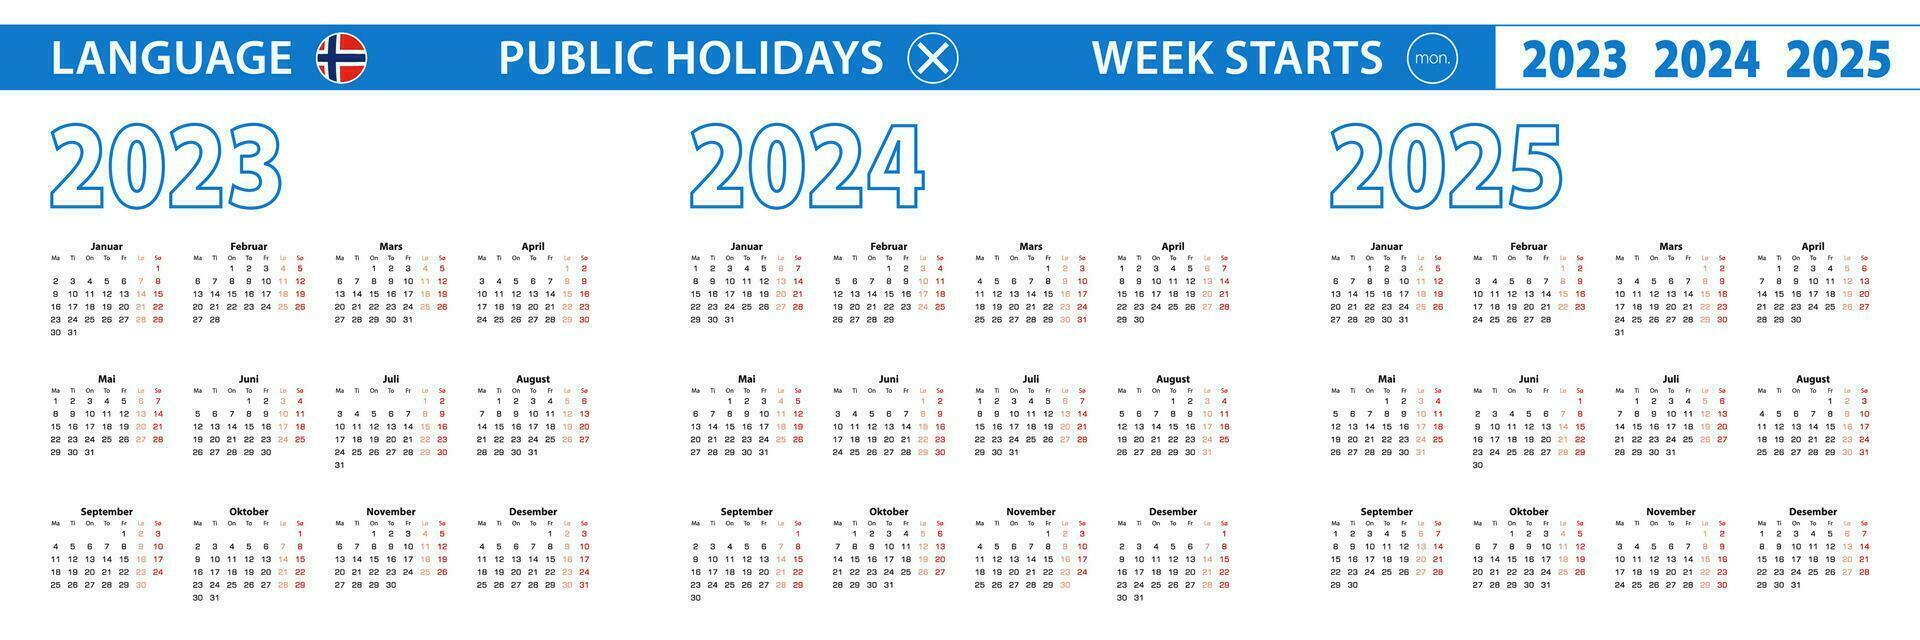 Simple calendar template in Norwegian for 2023, 2024, 2025 years. Week starts from Monday. vector